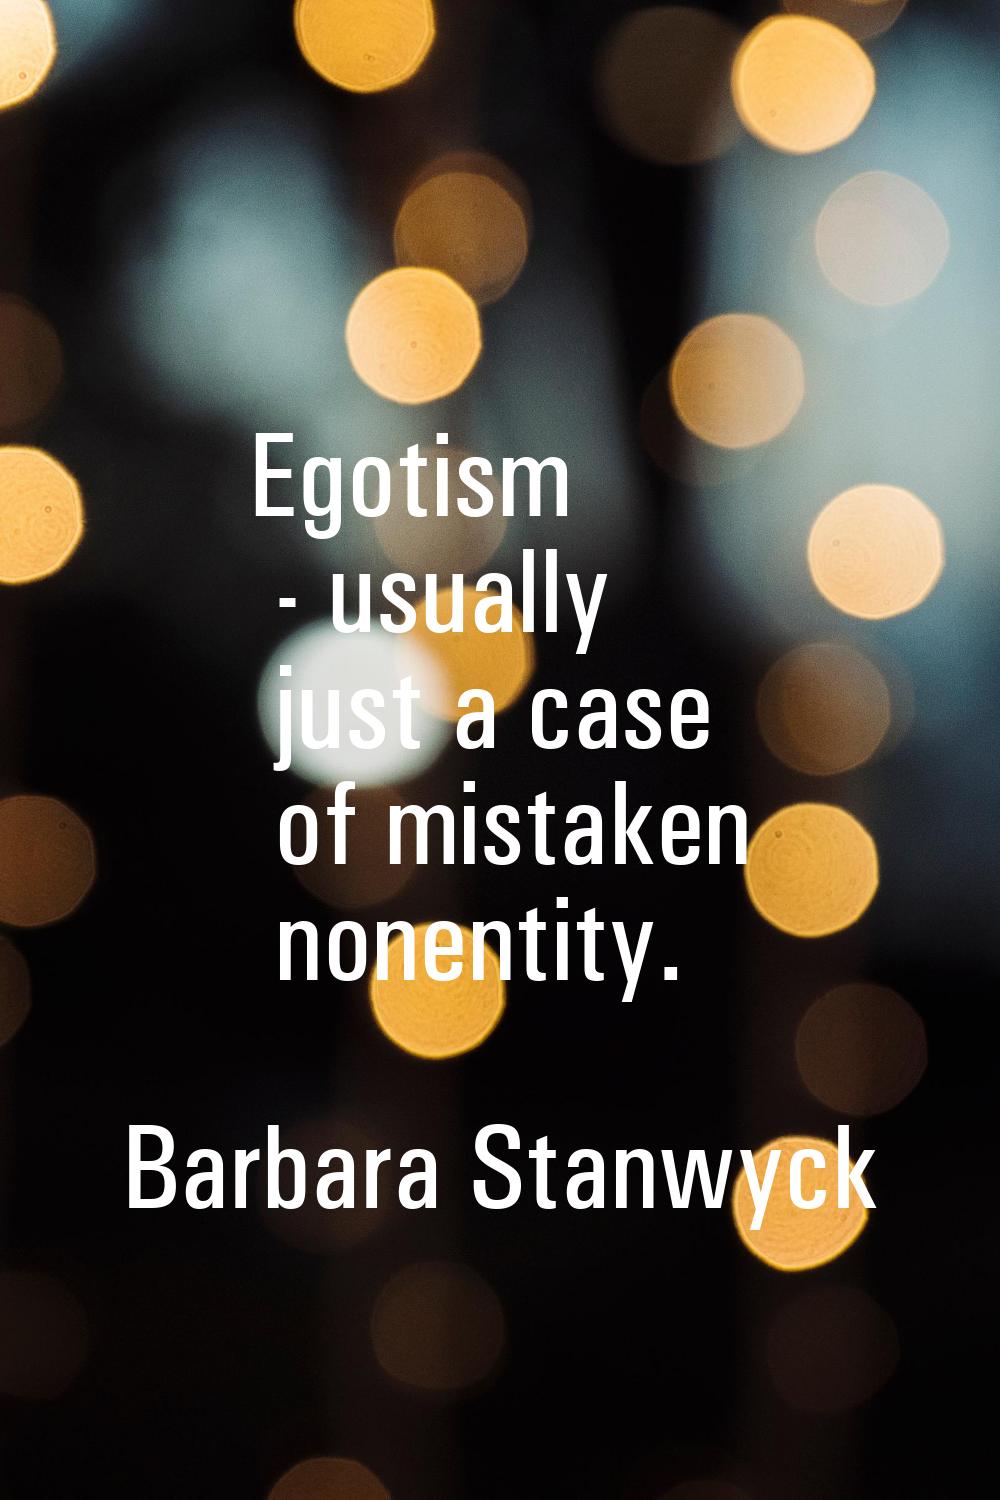 Egotism - usually just a case of mistaken nonentity.